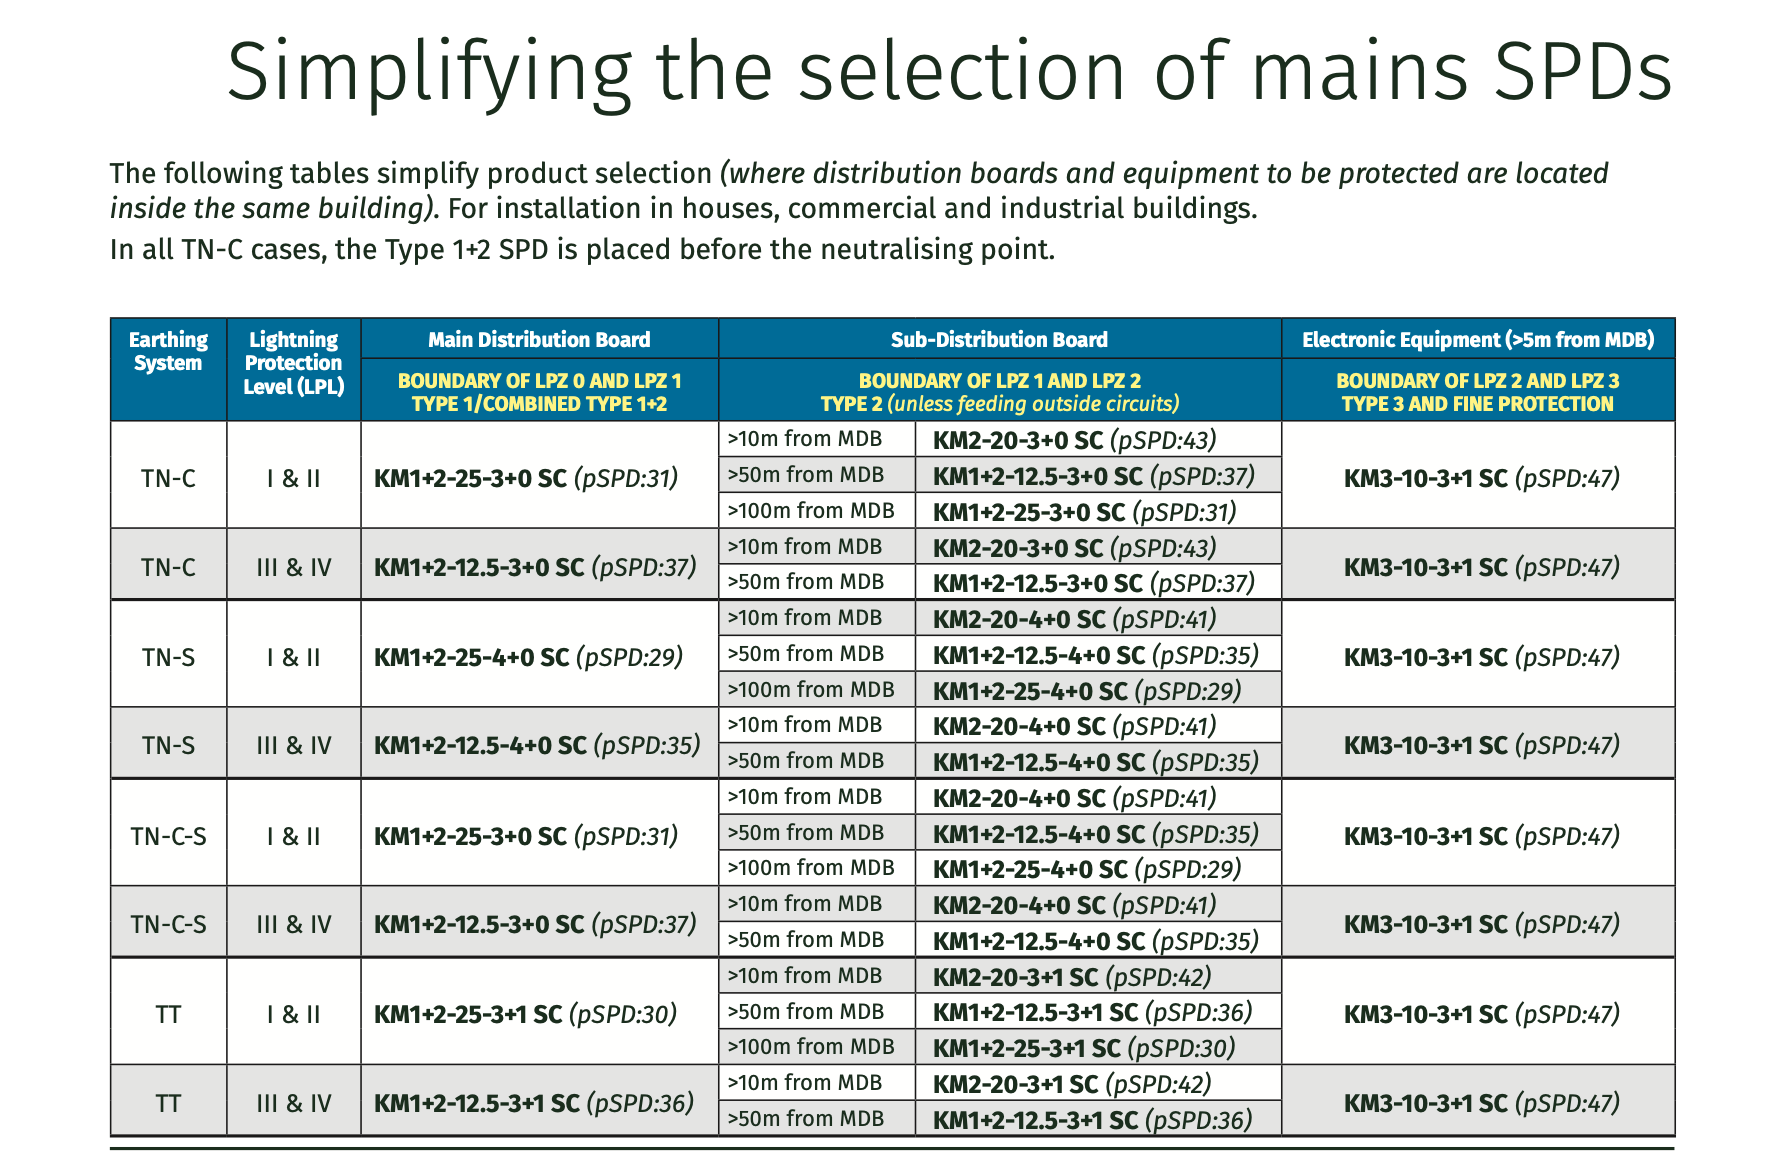 Simplification Chart to Select Mains SPDs